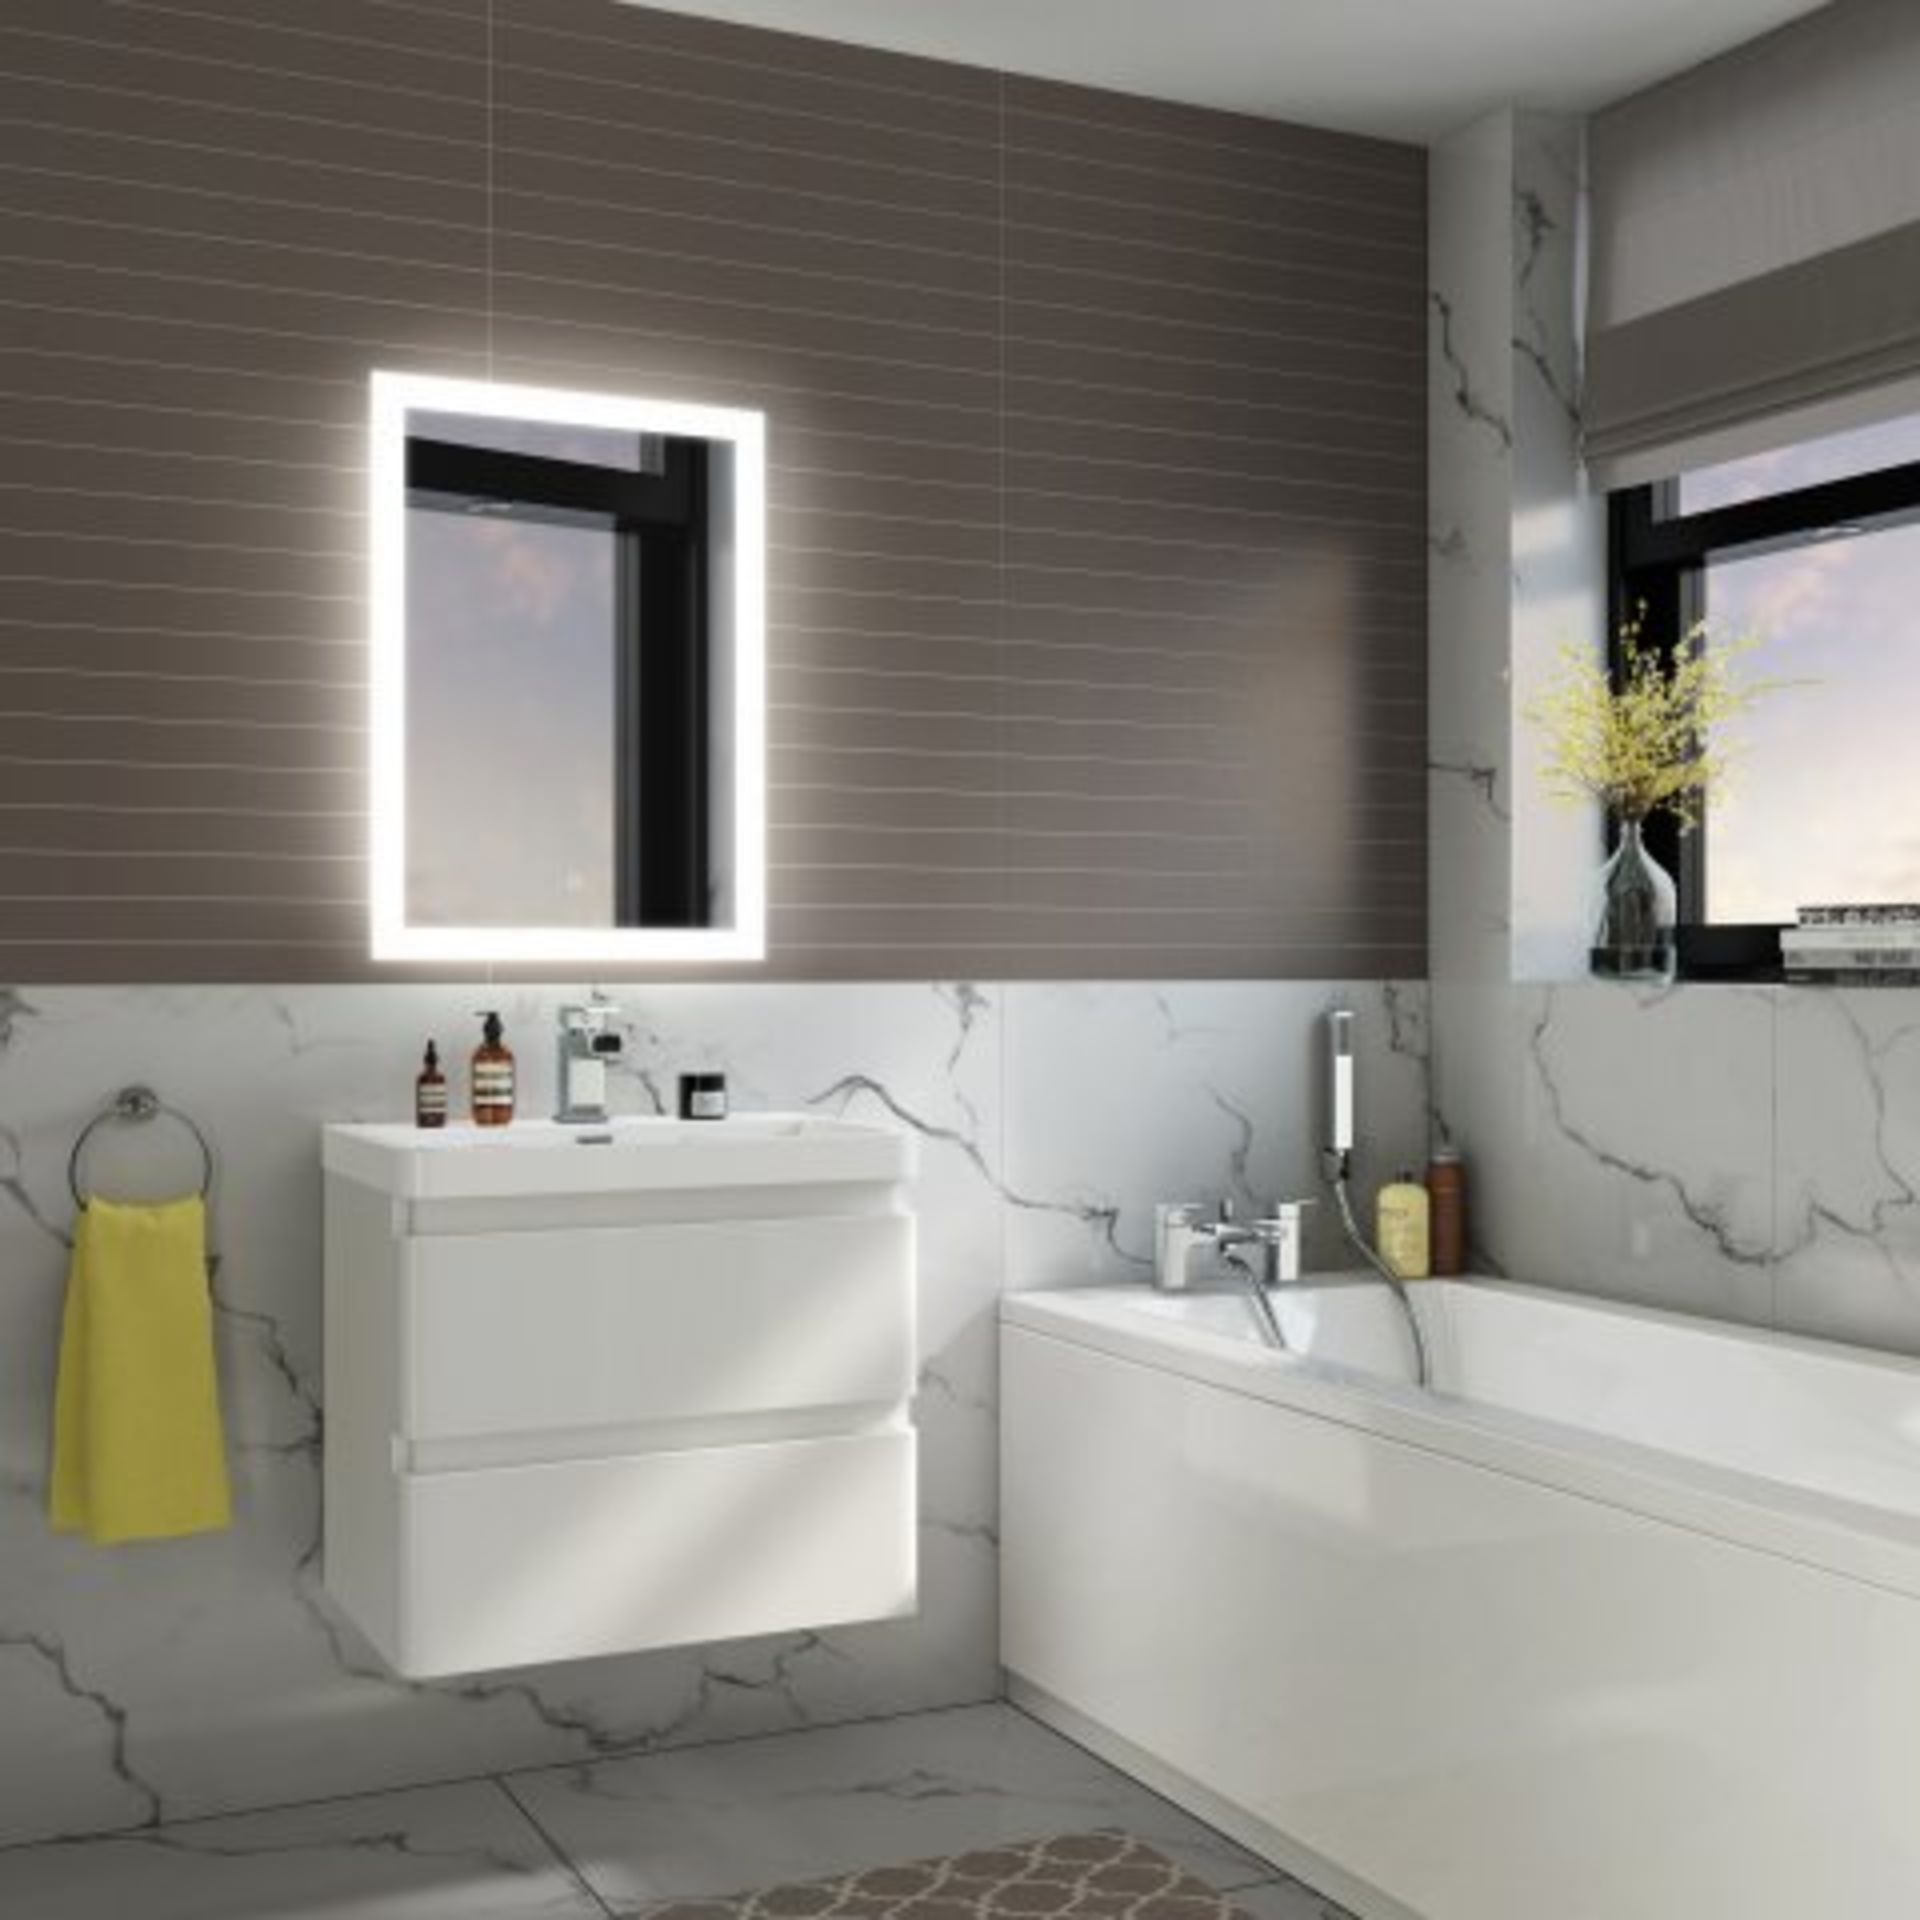 (H24) 700x500mm Orion Illuminated LED Mirror - Switch Control RRP £349.99 Light up your bathroom - Image 2 of 4